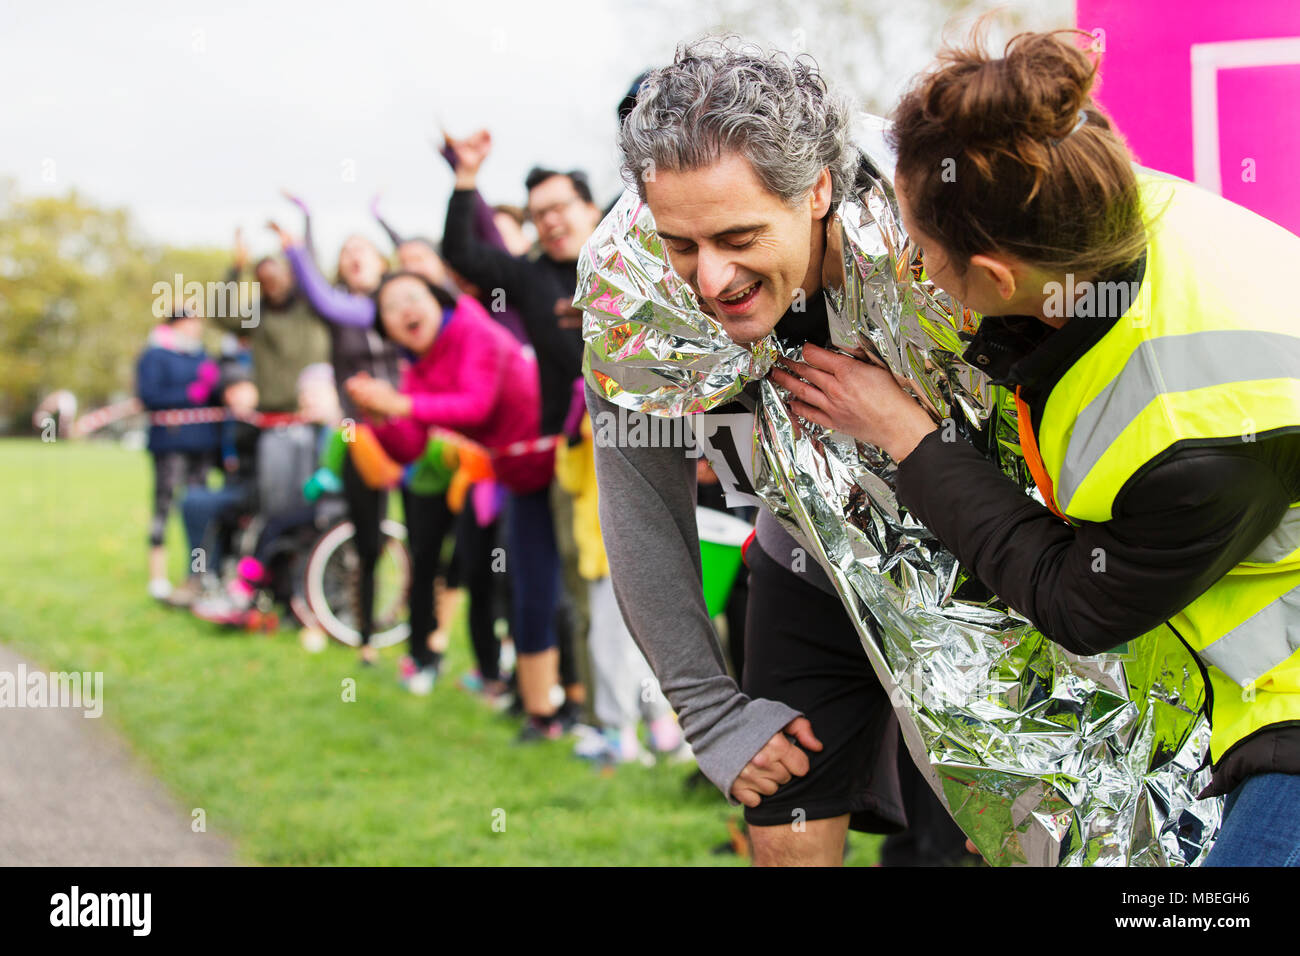 Woman wrapping thermal blanket around exhausted male runner finishing marathon Stock Photo